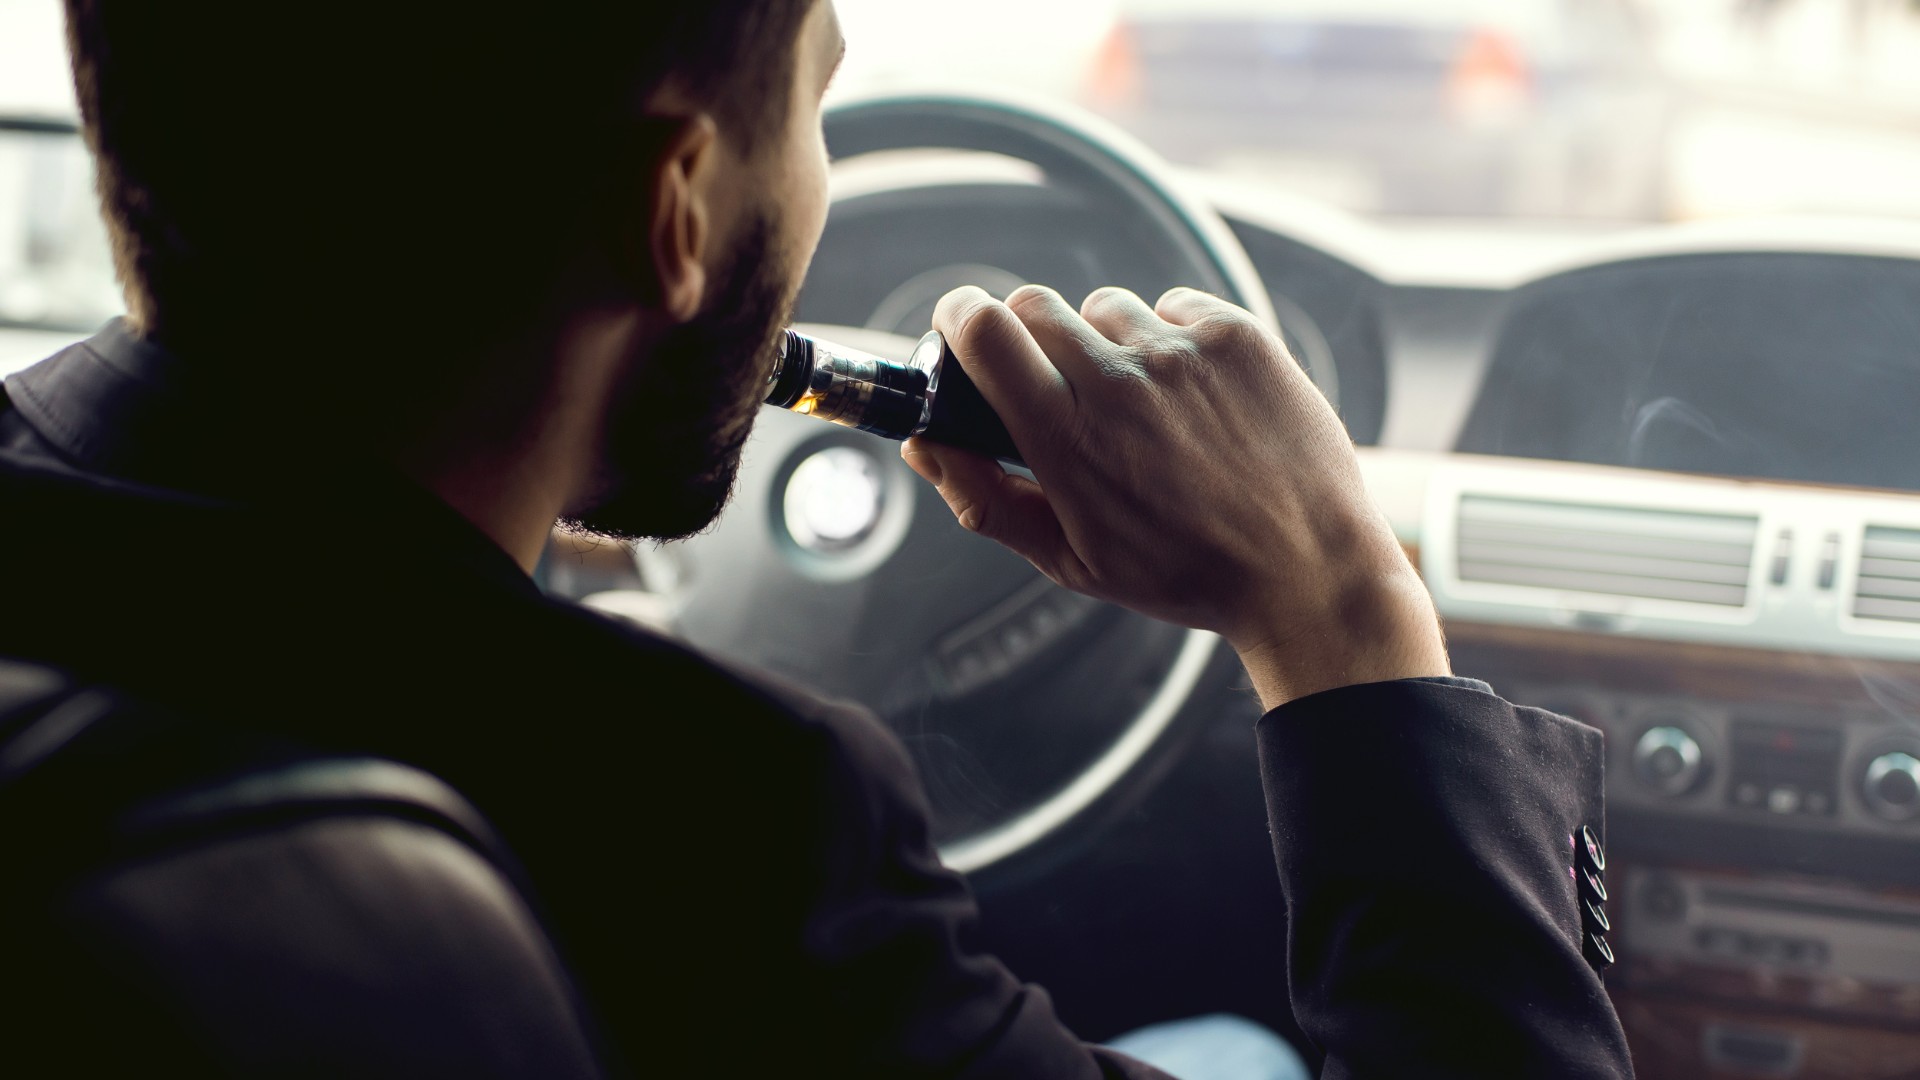 Vaping while driving